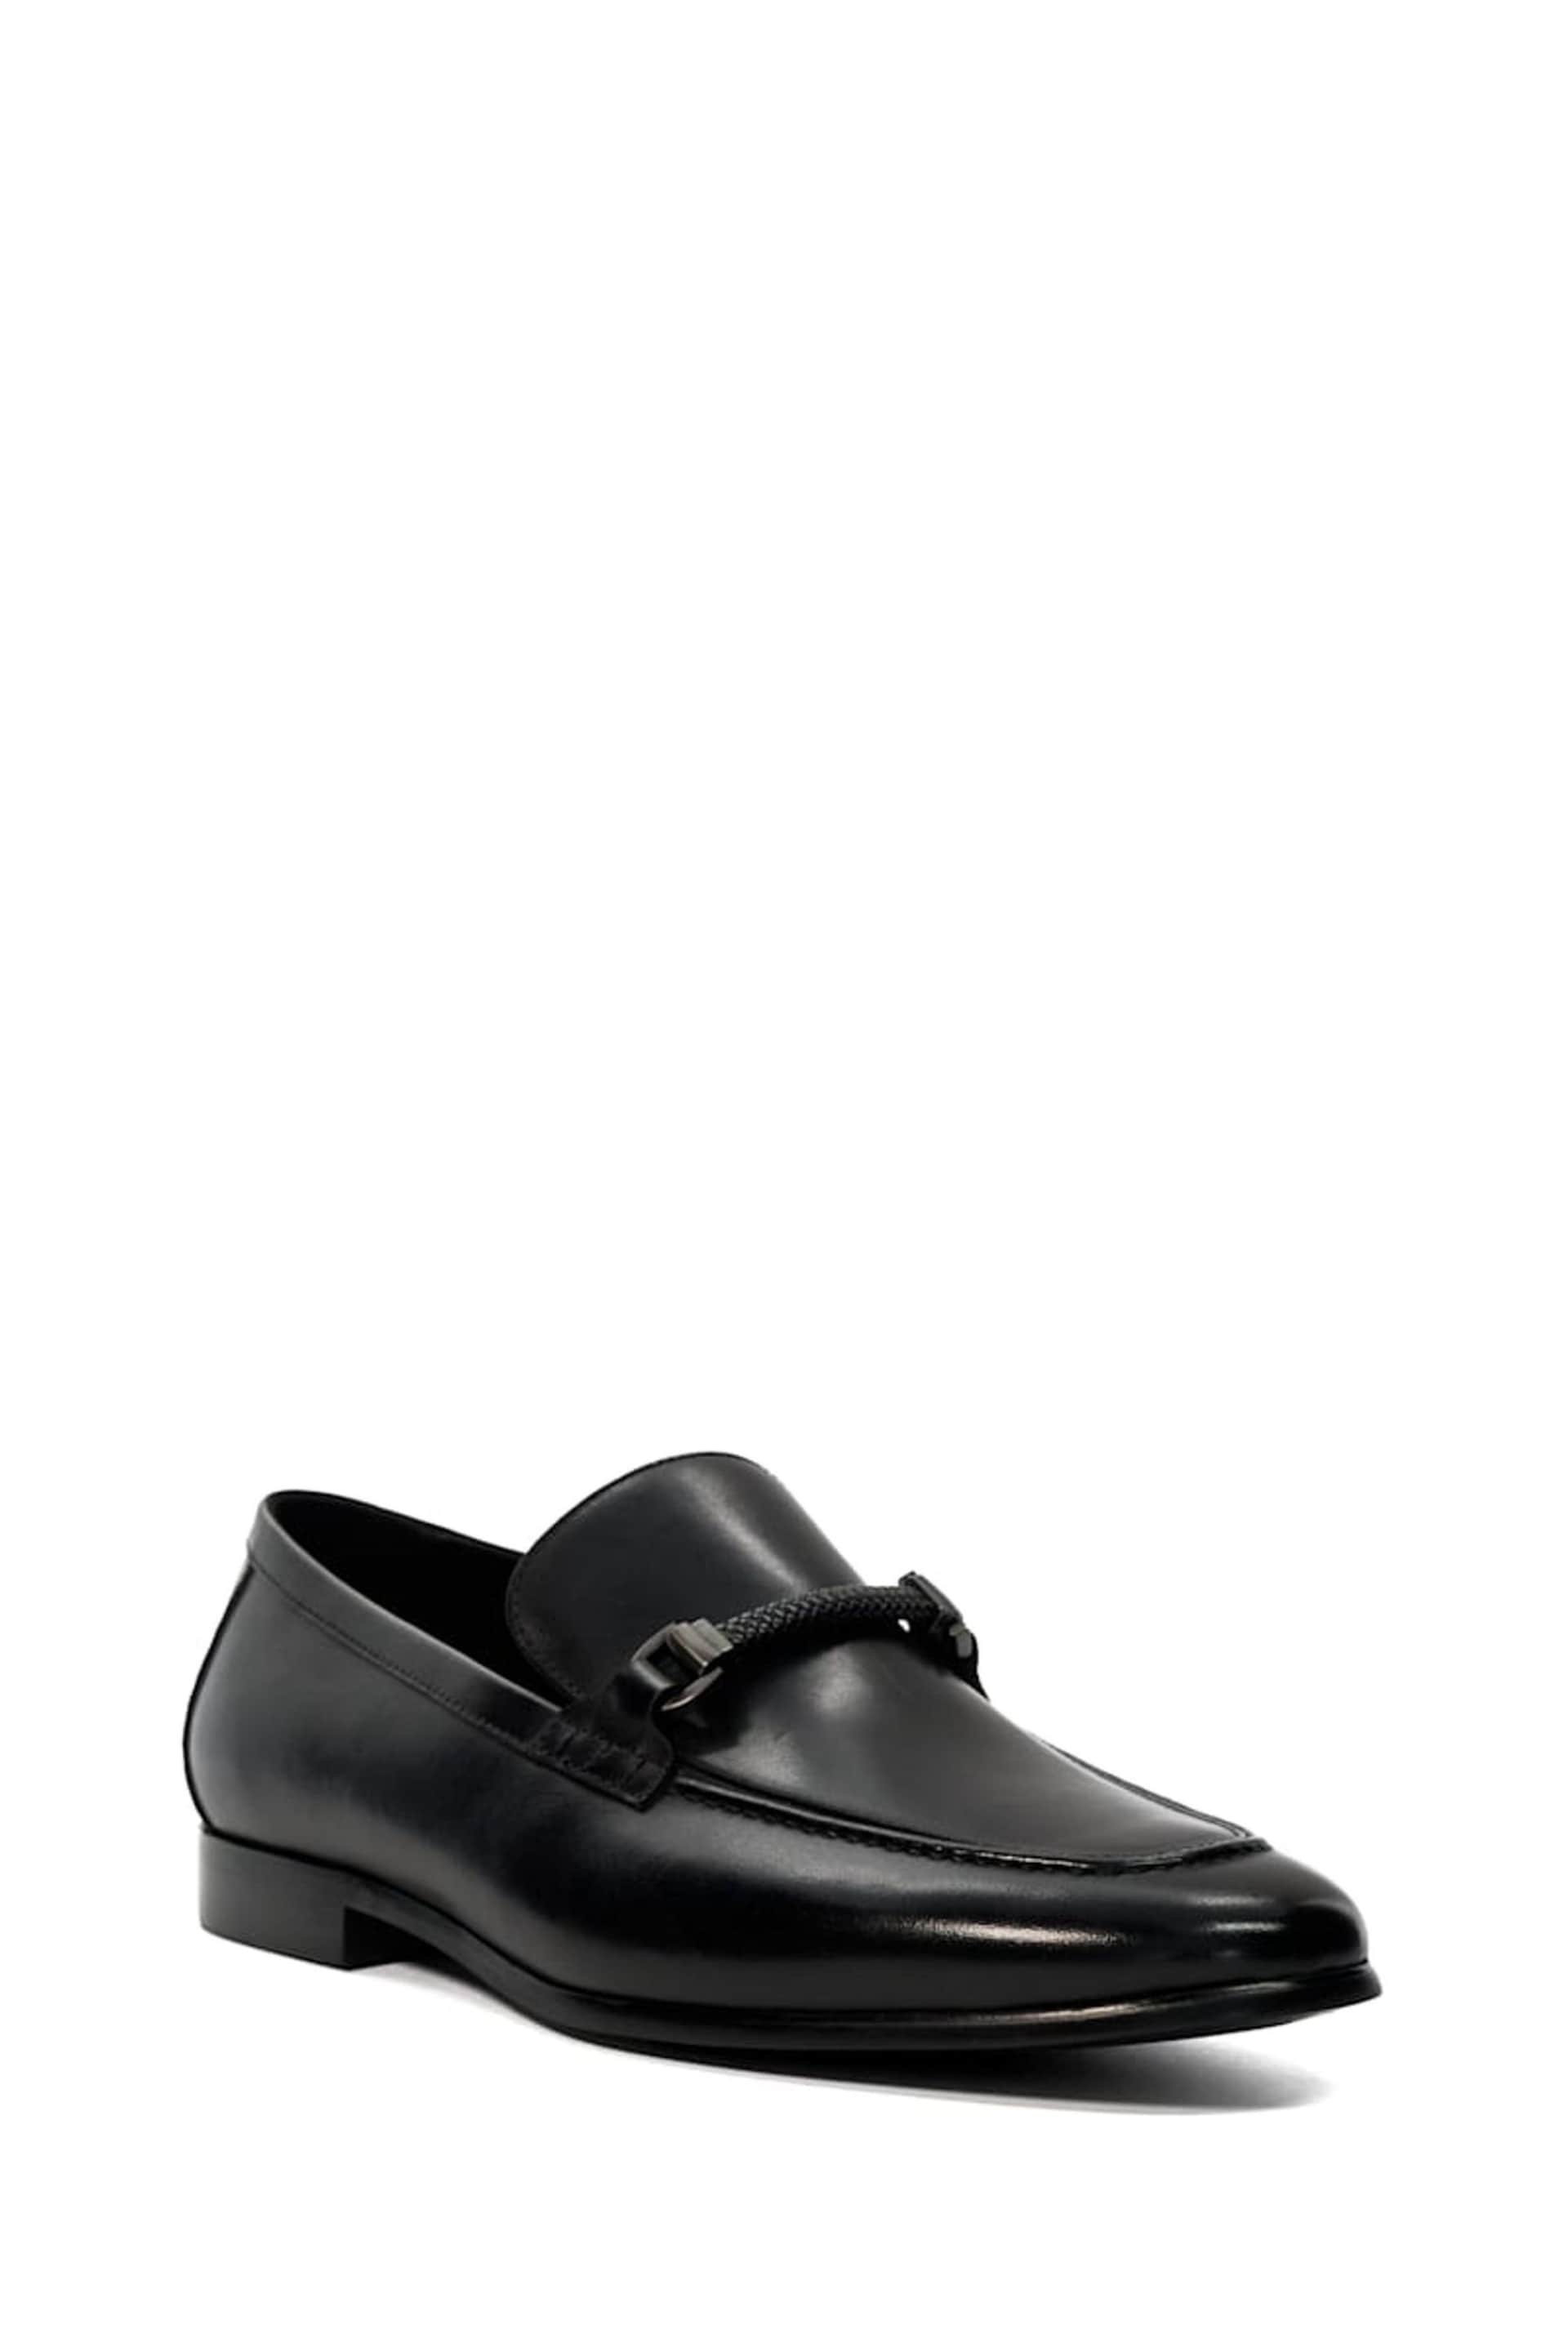 Dune London Black Scilly Woven Trim Loafers - Image 3 of 6